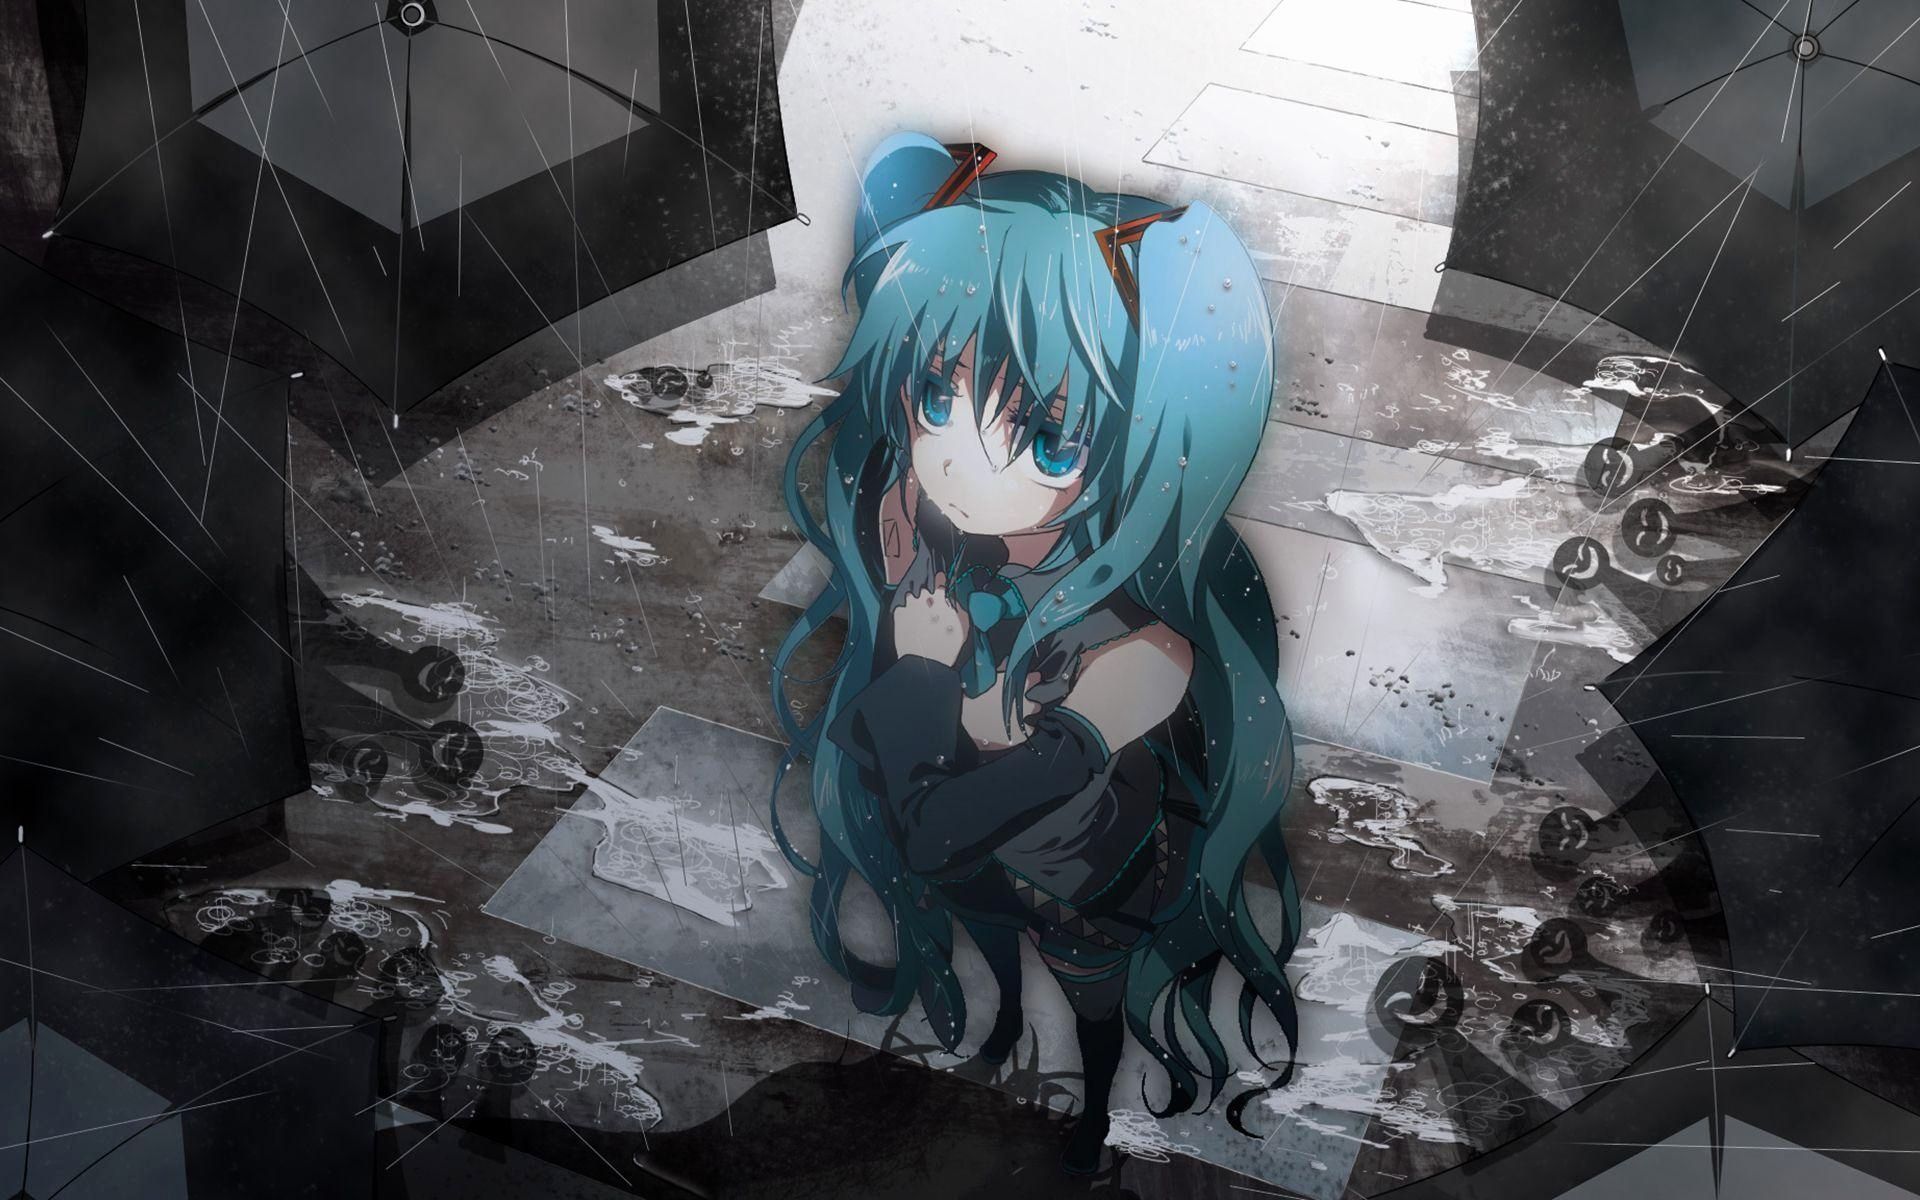 Sad Anime Wallpapers Best Of Sad Anime Wallpapers Wallpapers Cave Ideas